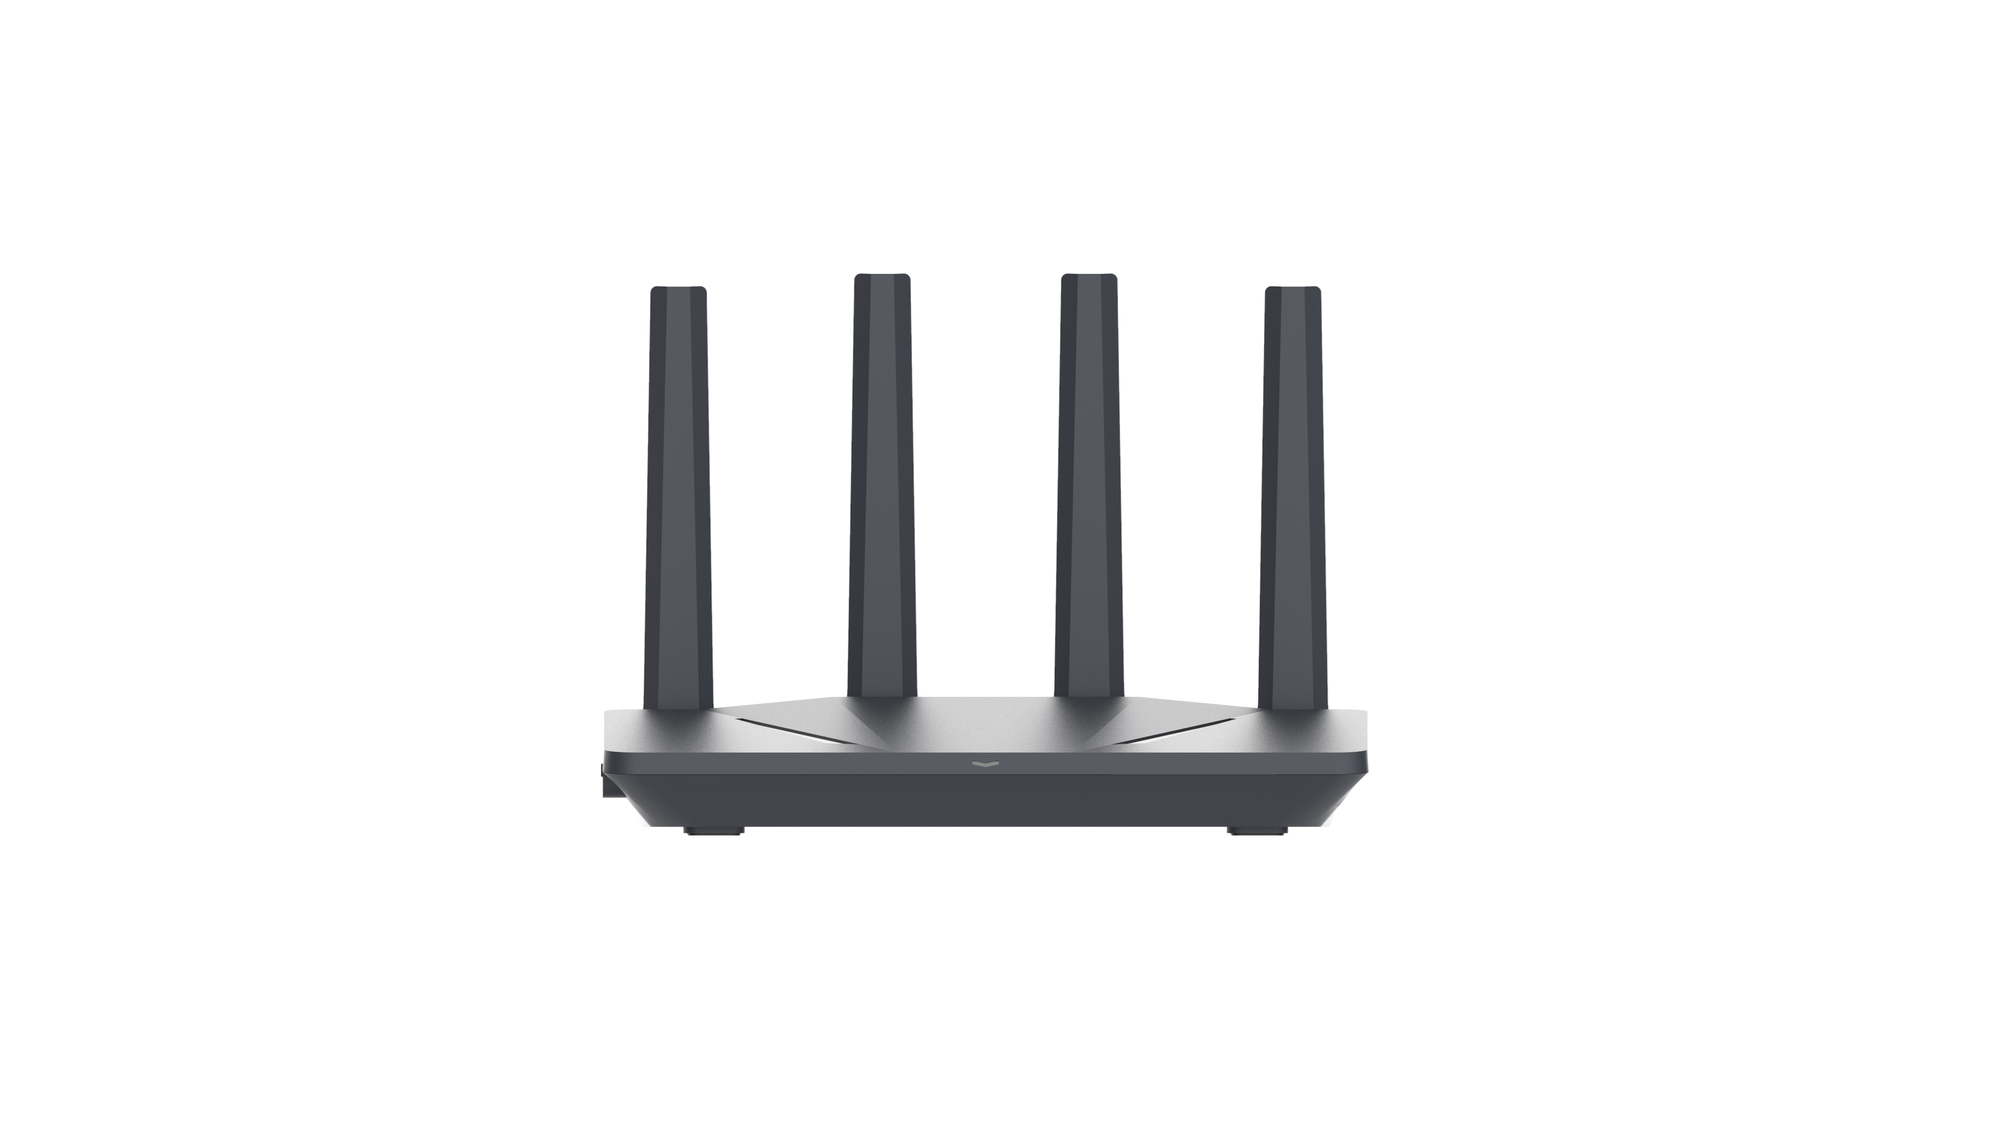 Introducing Encrouter, the World’s Most Private & Secure Fully Integrated VPN Router